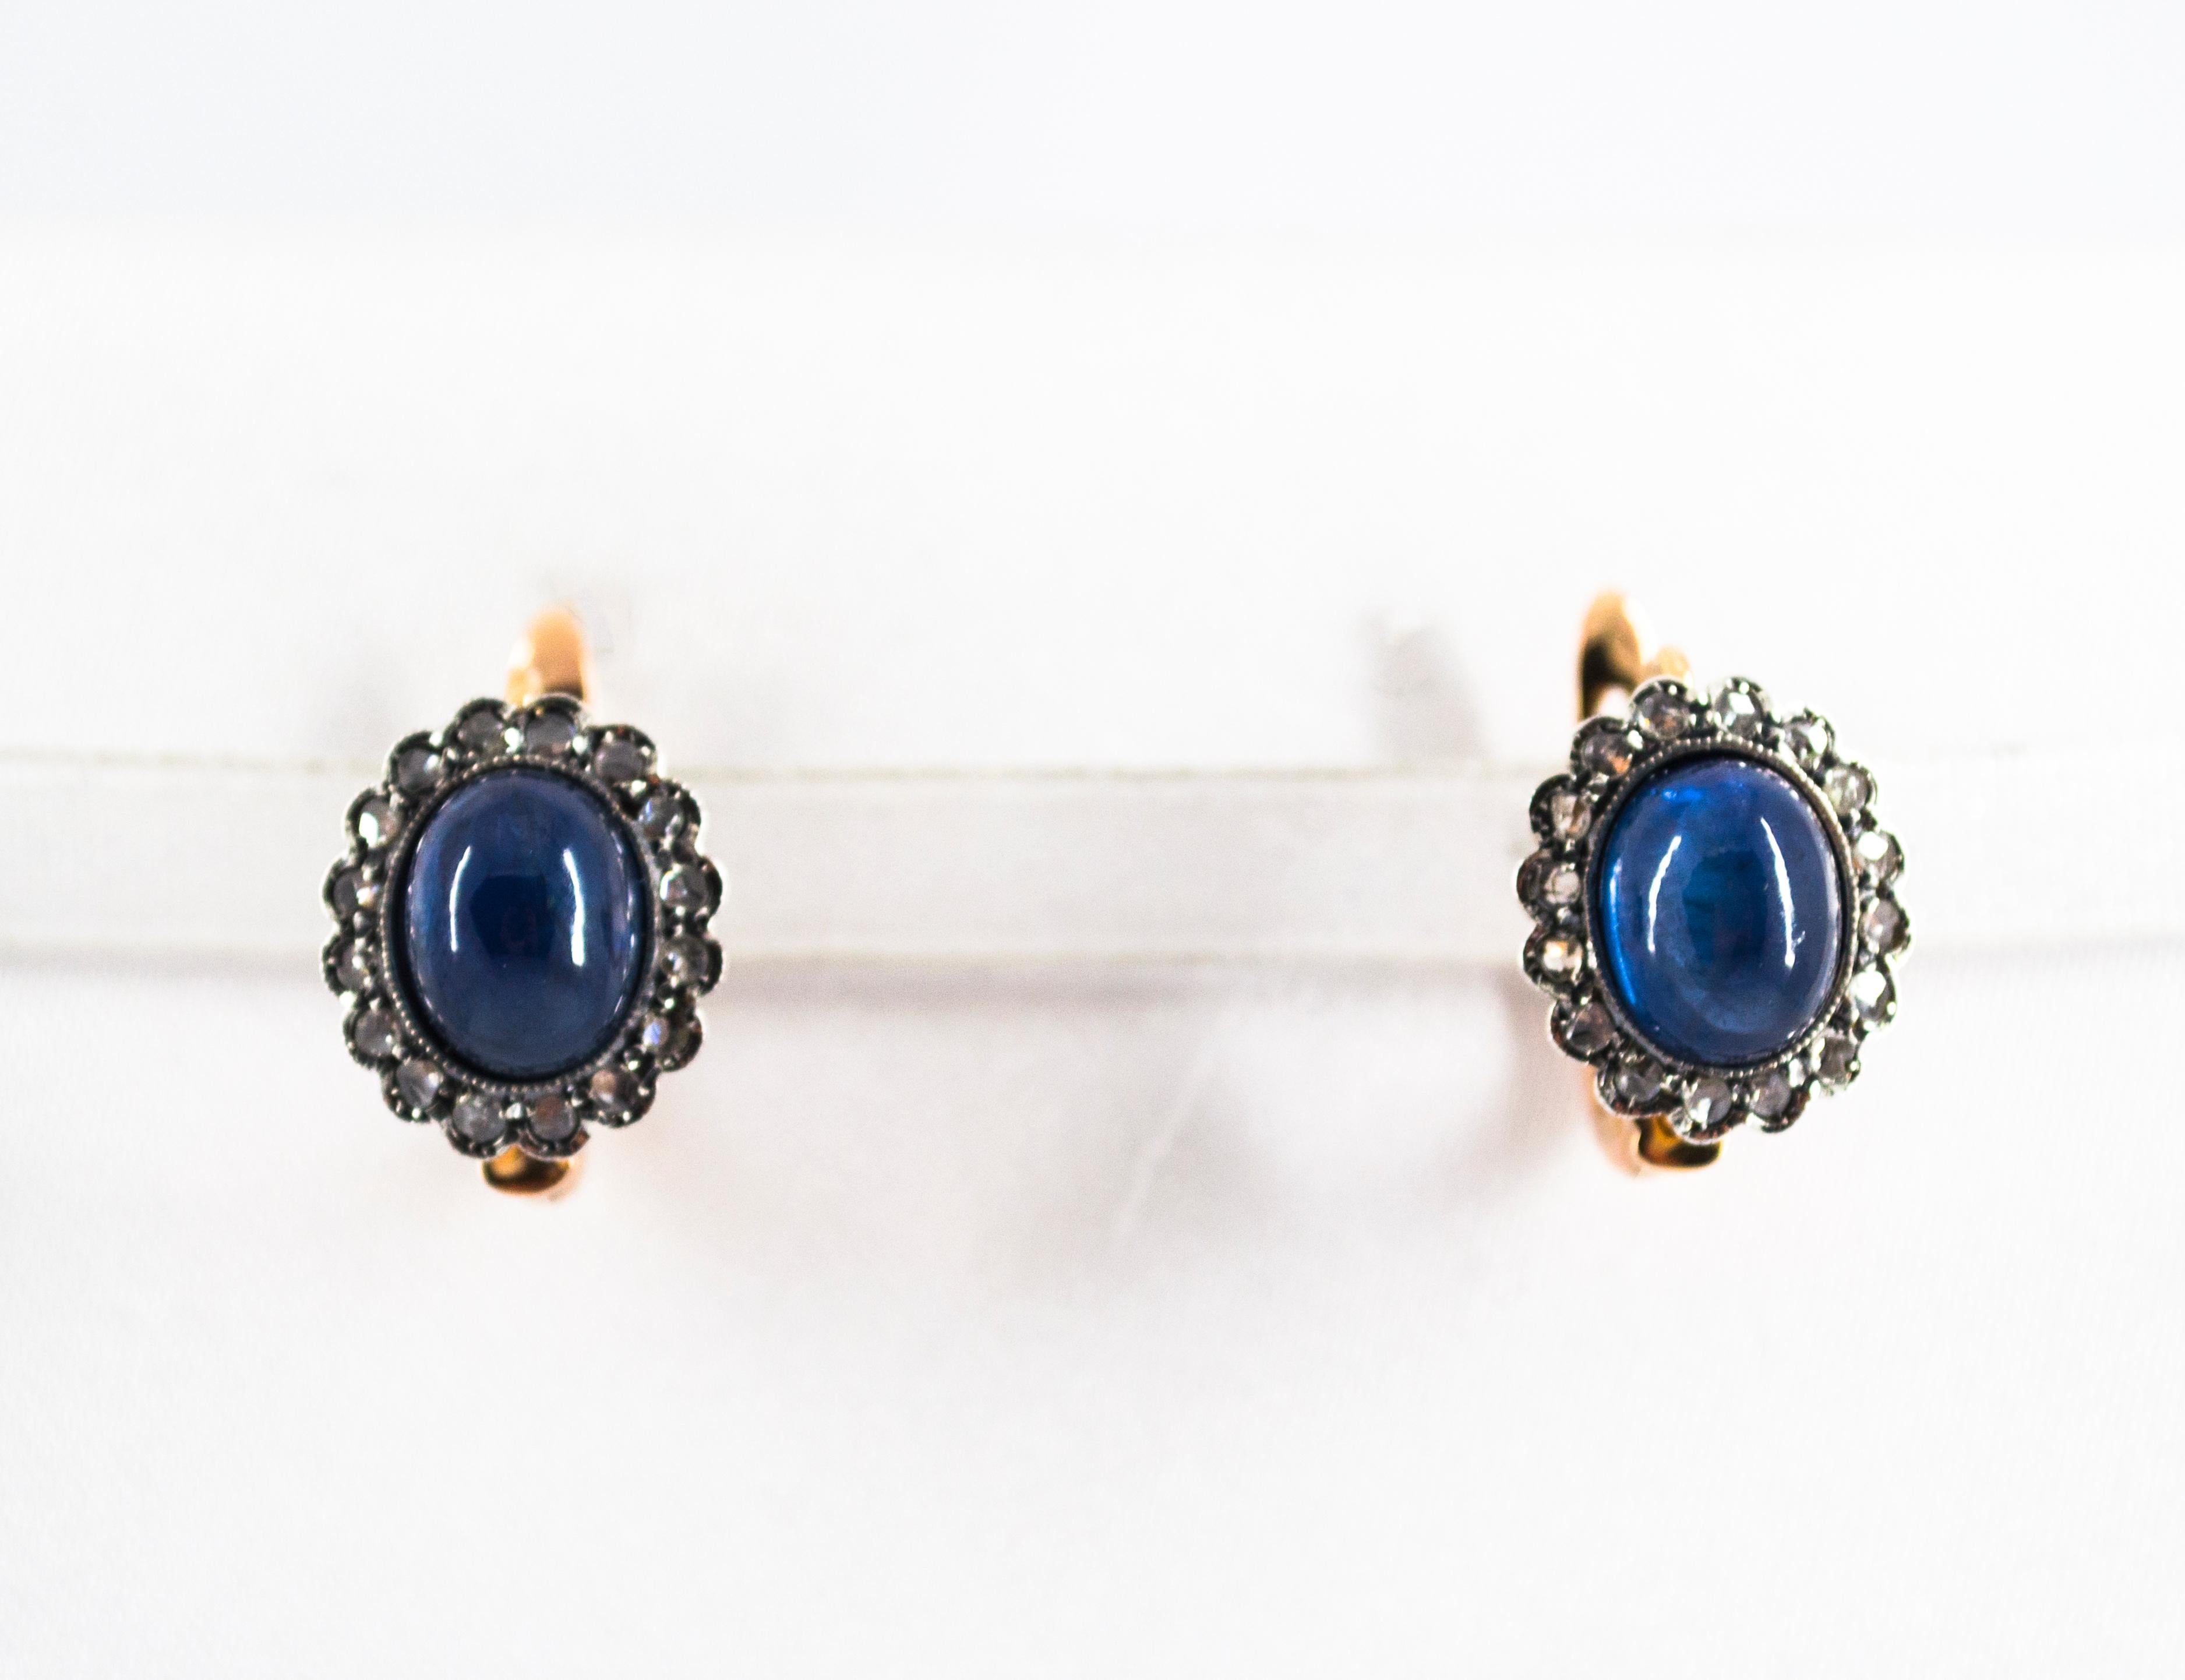 These Earrings are made of 9K Yellow Gold and Sterling Silver.
These Earrings are available also in 14K and 18K Yellow Gold.
These Earrings have 0.30 Carats of White Rose Cut Diamonds.
These Earrings have 7.10 Carats of Blue Cabochon Cut